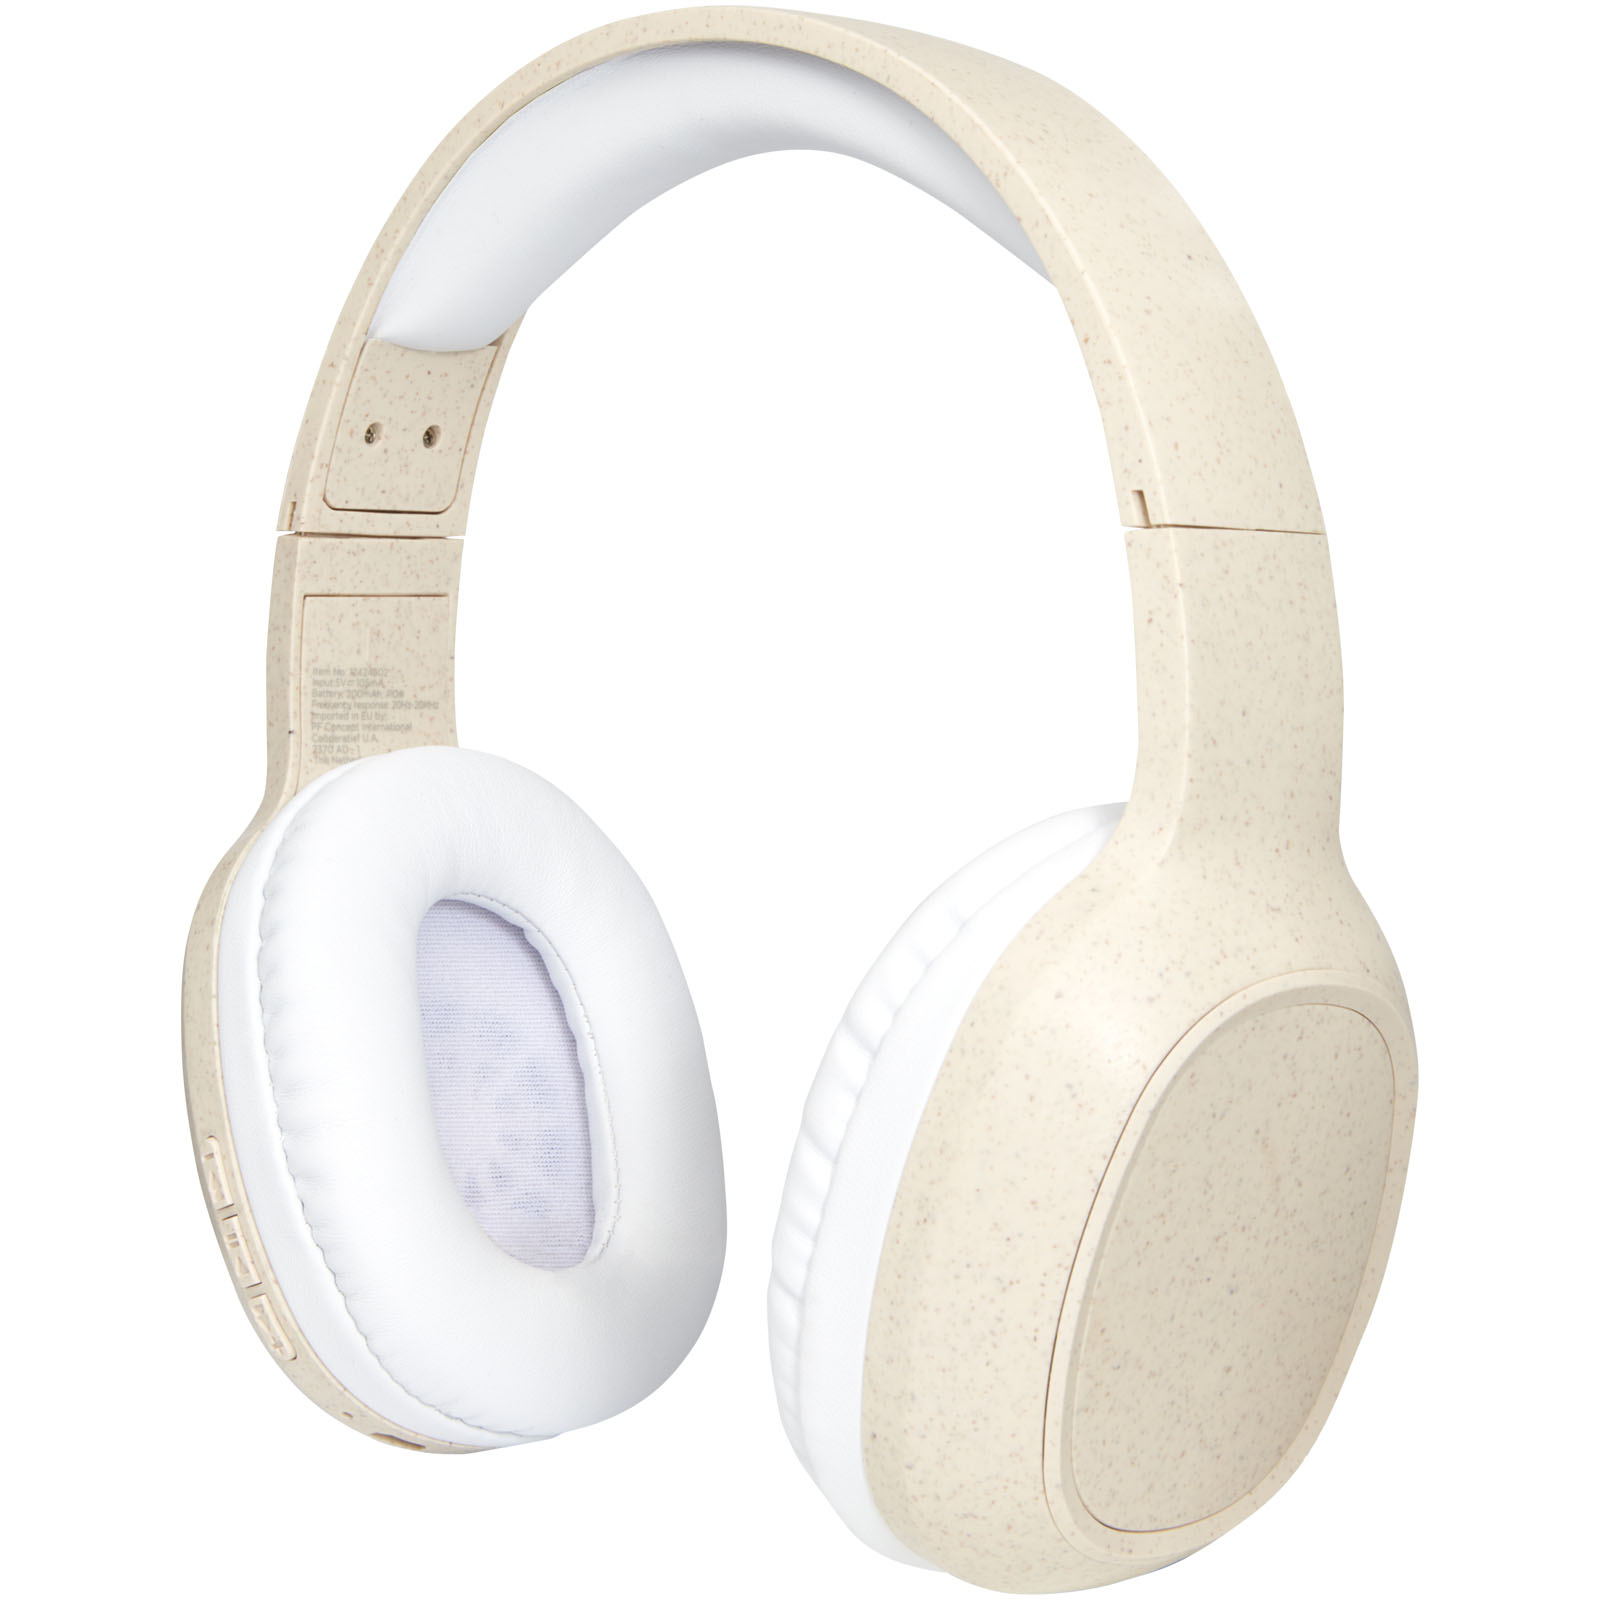 Technology - Riff wheat straw Bluetooth® headphones with microphone